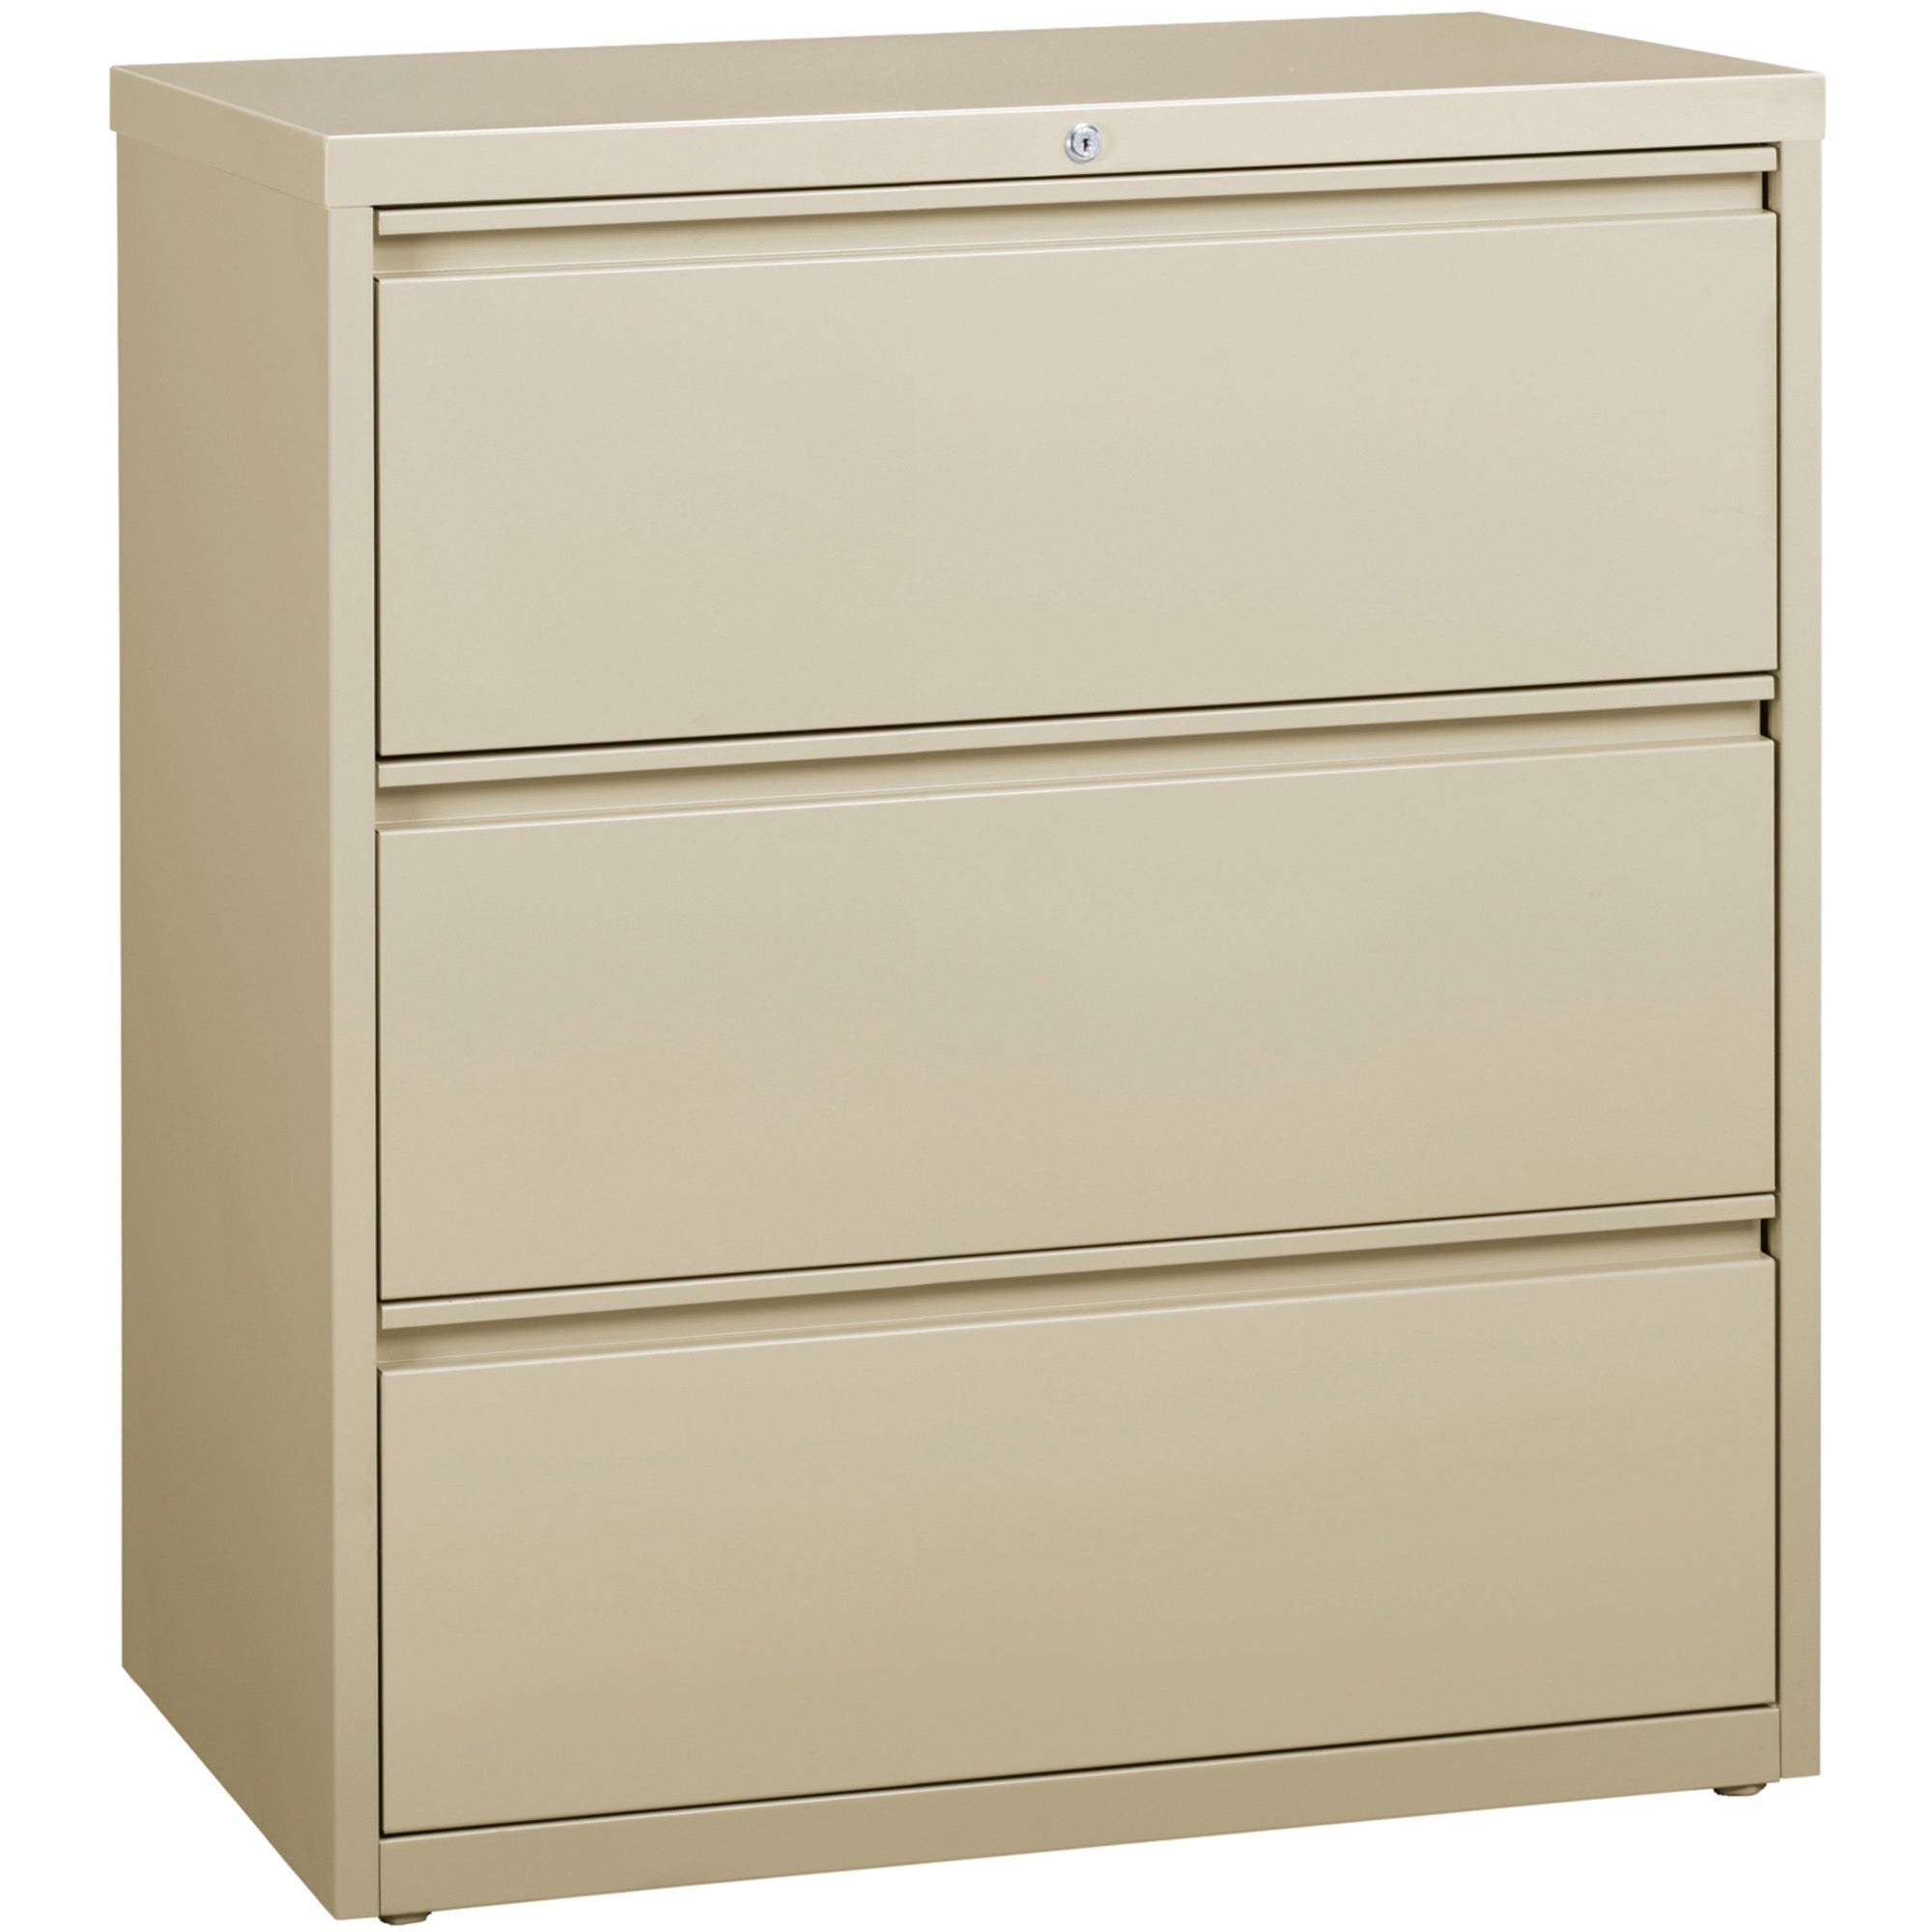 Lorell Fortress Series Lateral File - 36" x 18.6" x 40.3" - 3 x Drawer(s) for File - Letter, Legal, A4 - Lateral - Locking Drawer, Magnetic Label Holder, Ball-bearing Suspension, Leveling Glide - Putty - Steel - Recycled - 